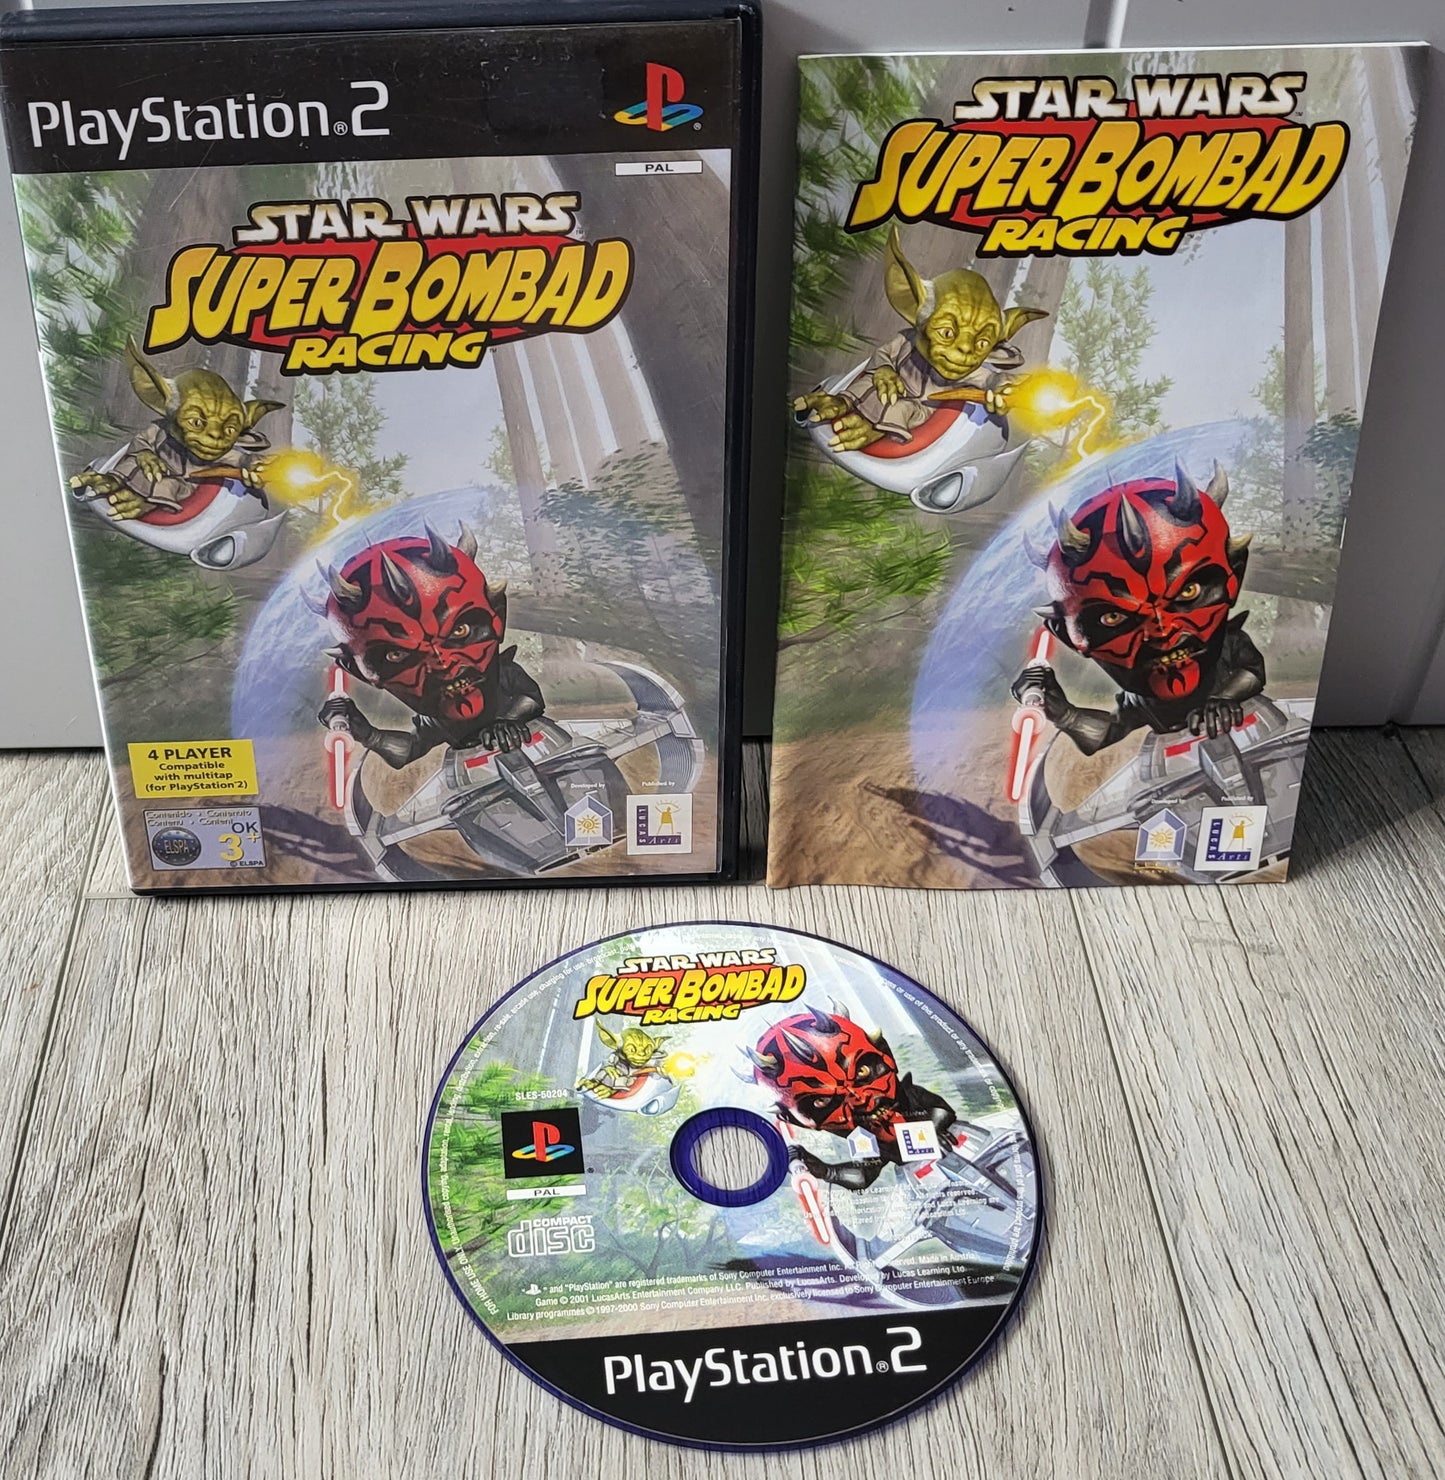 Star Wars Super Bombad Racing sony PlayStation 2 (ps2) Game